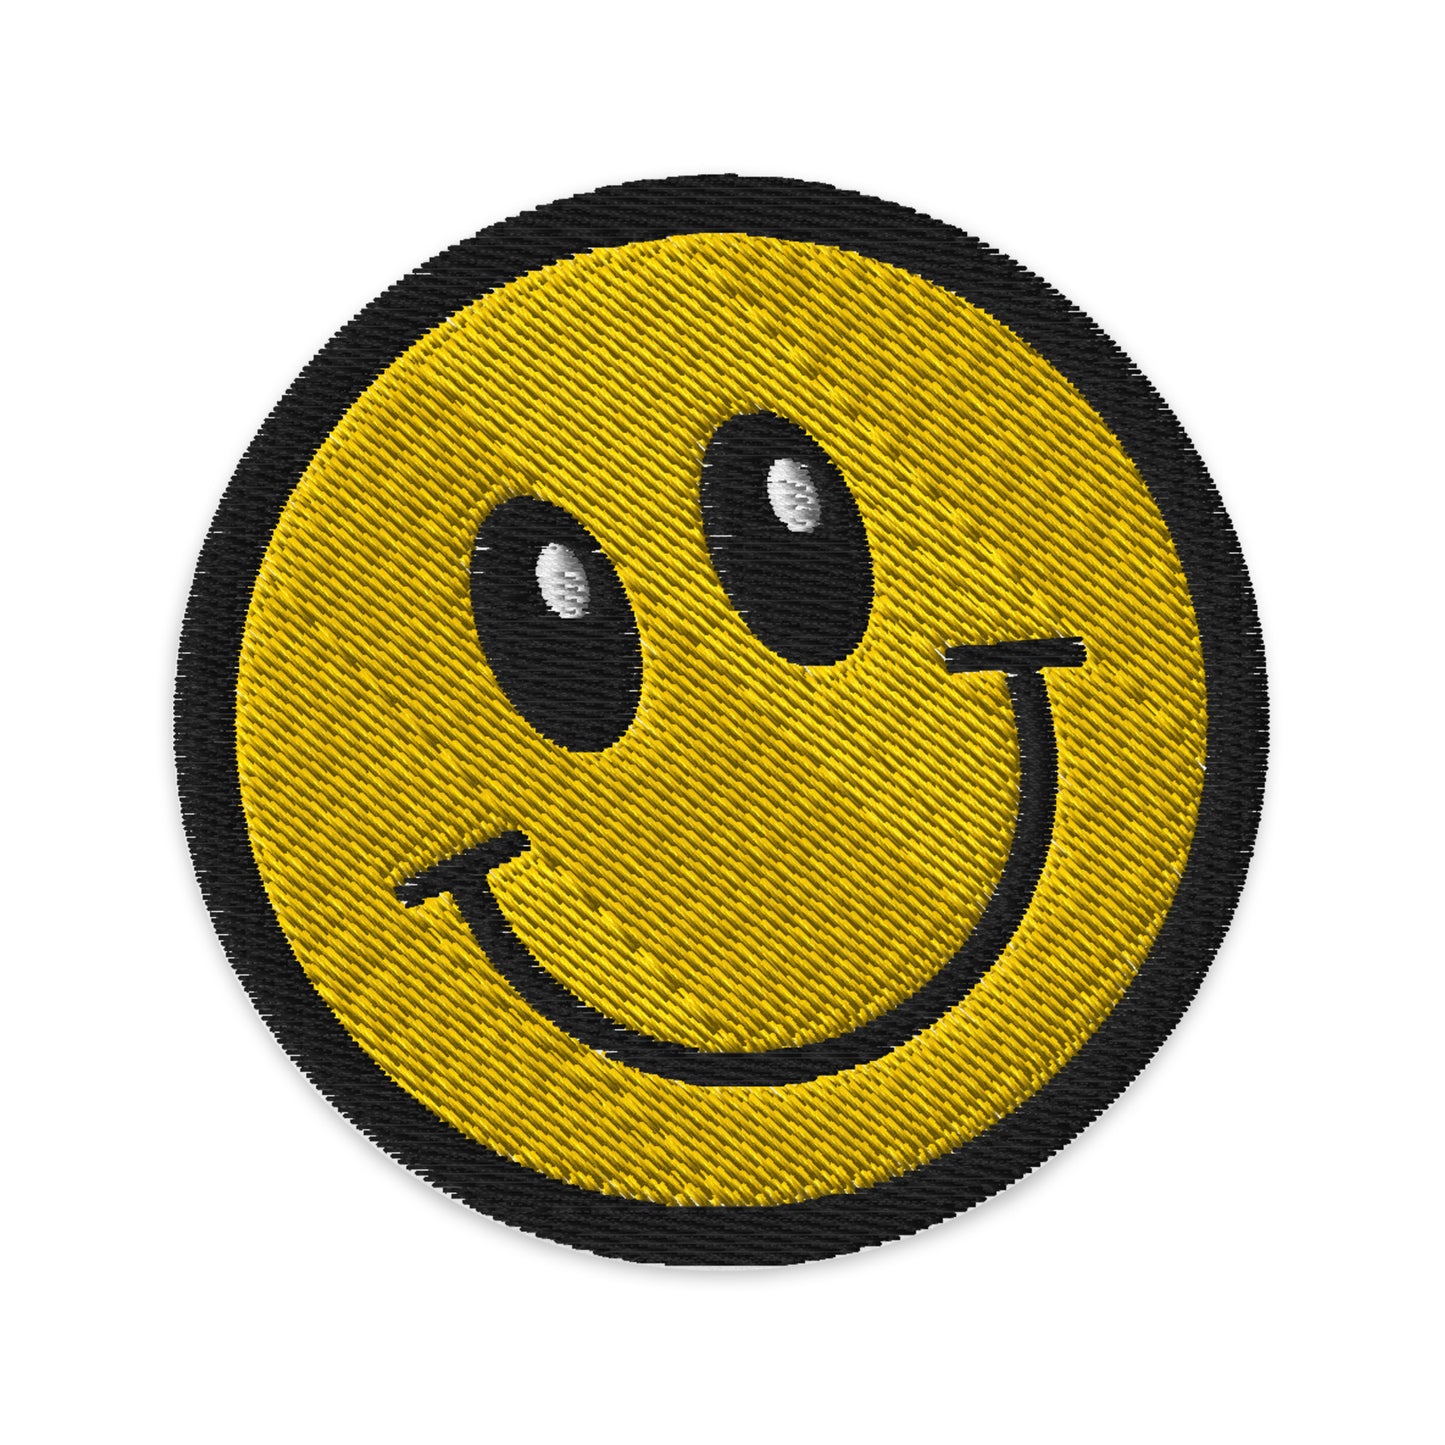 Classic Acid Smiley - Embroidered patches